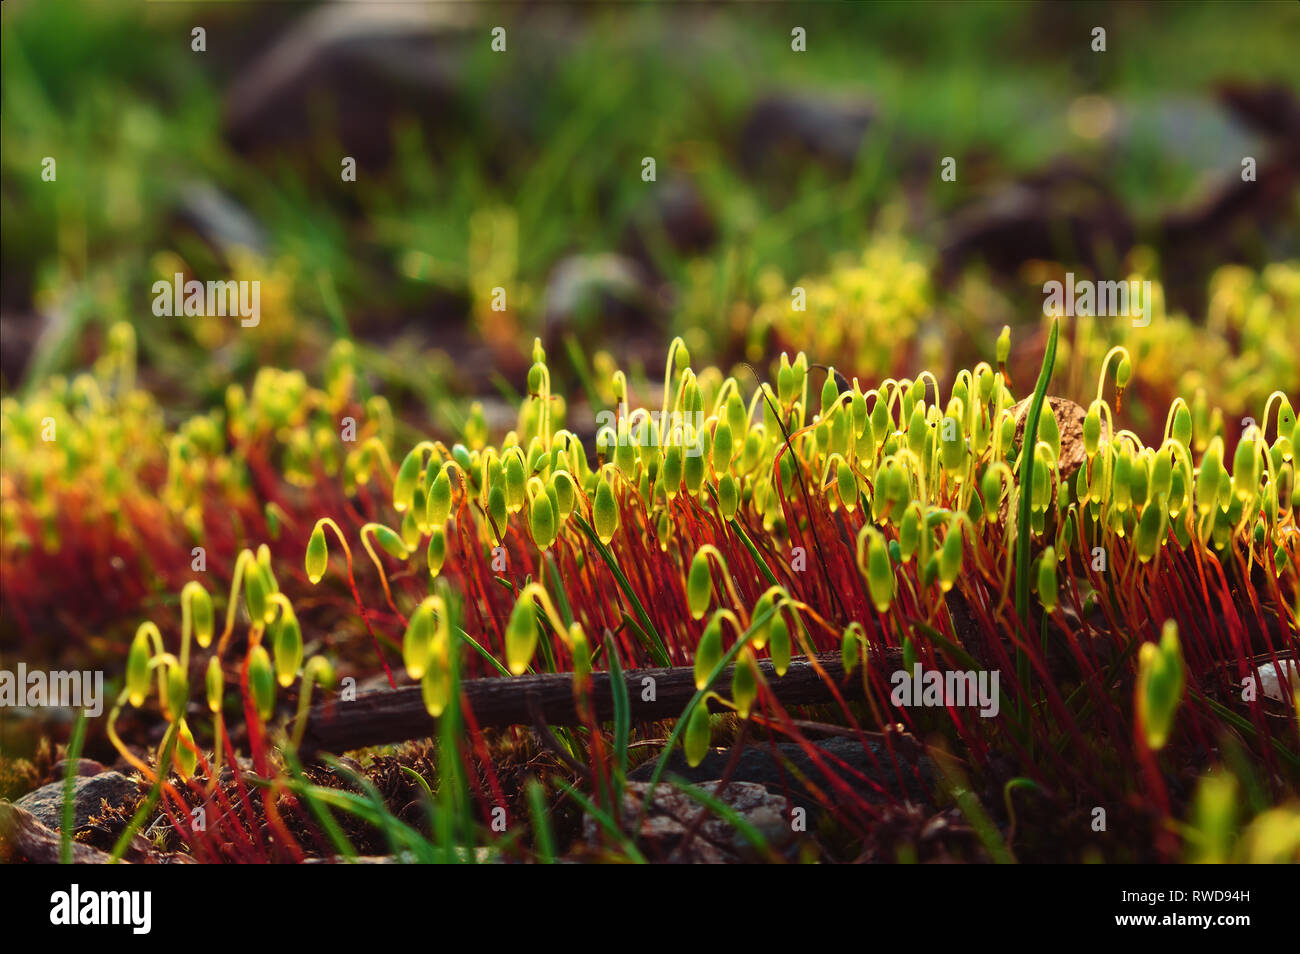 First sprouts of Spring, nature awakening. Bright spring nature photography Stock Photo